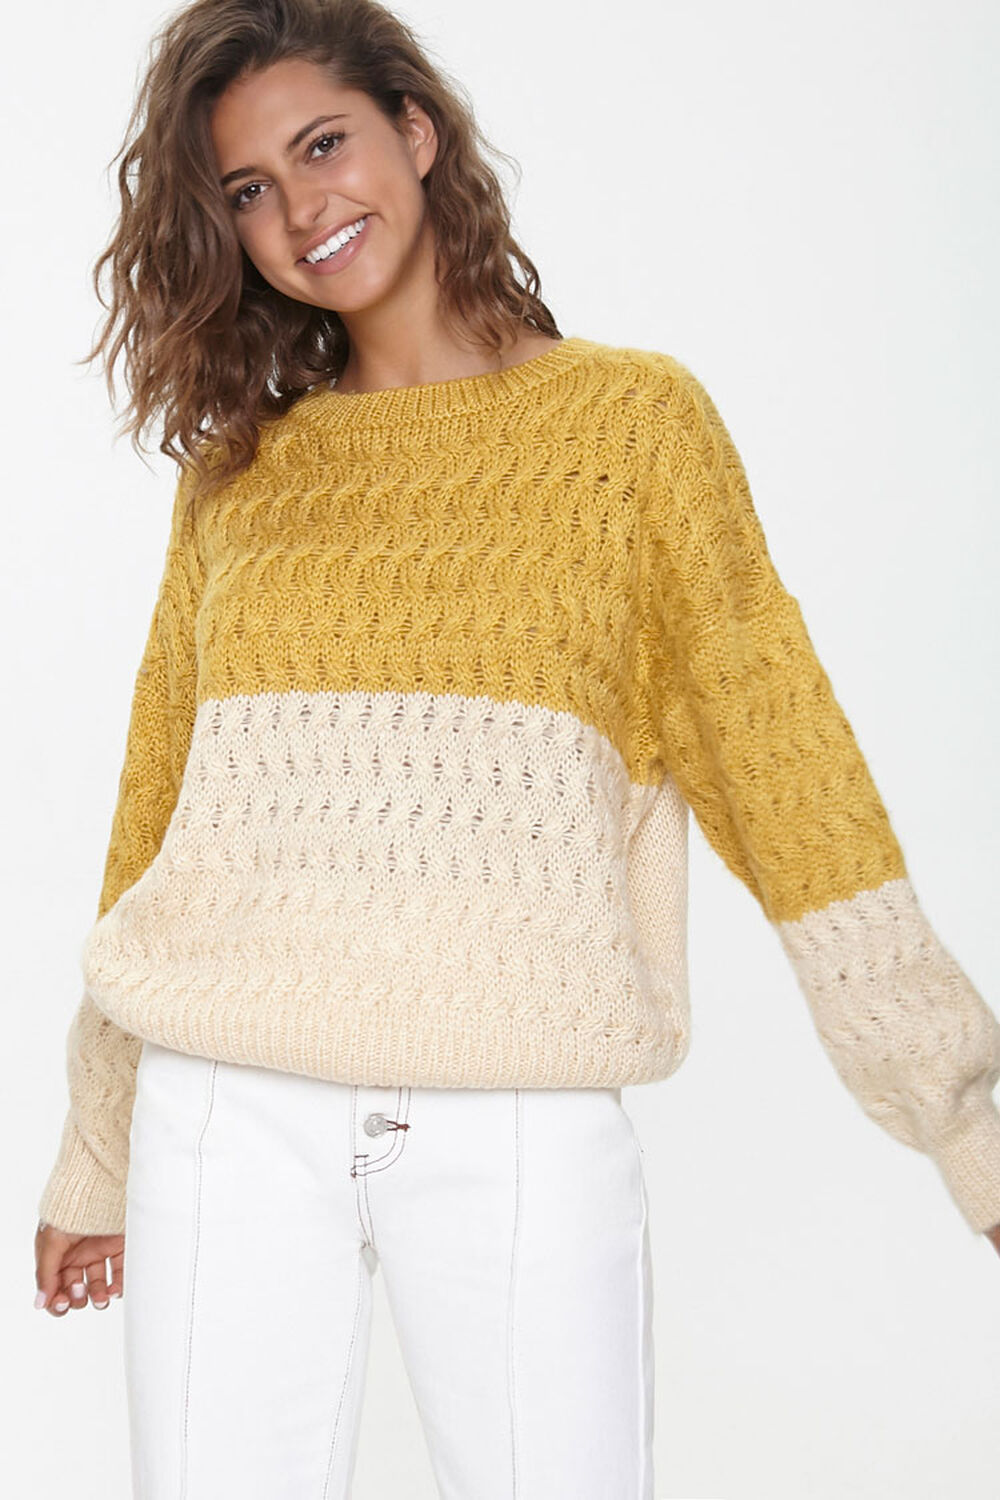 MUSTARD/IVORY Colorblock Cable Knit Sweater, image 1